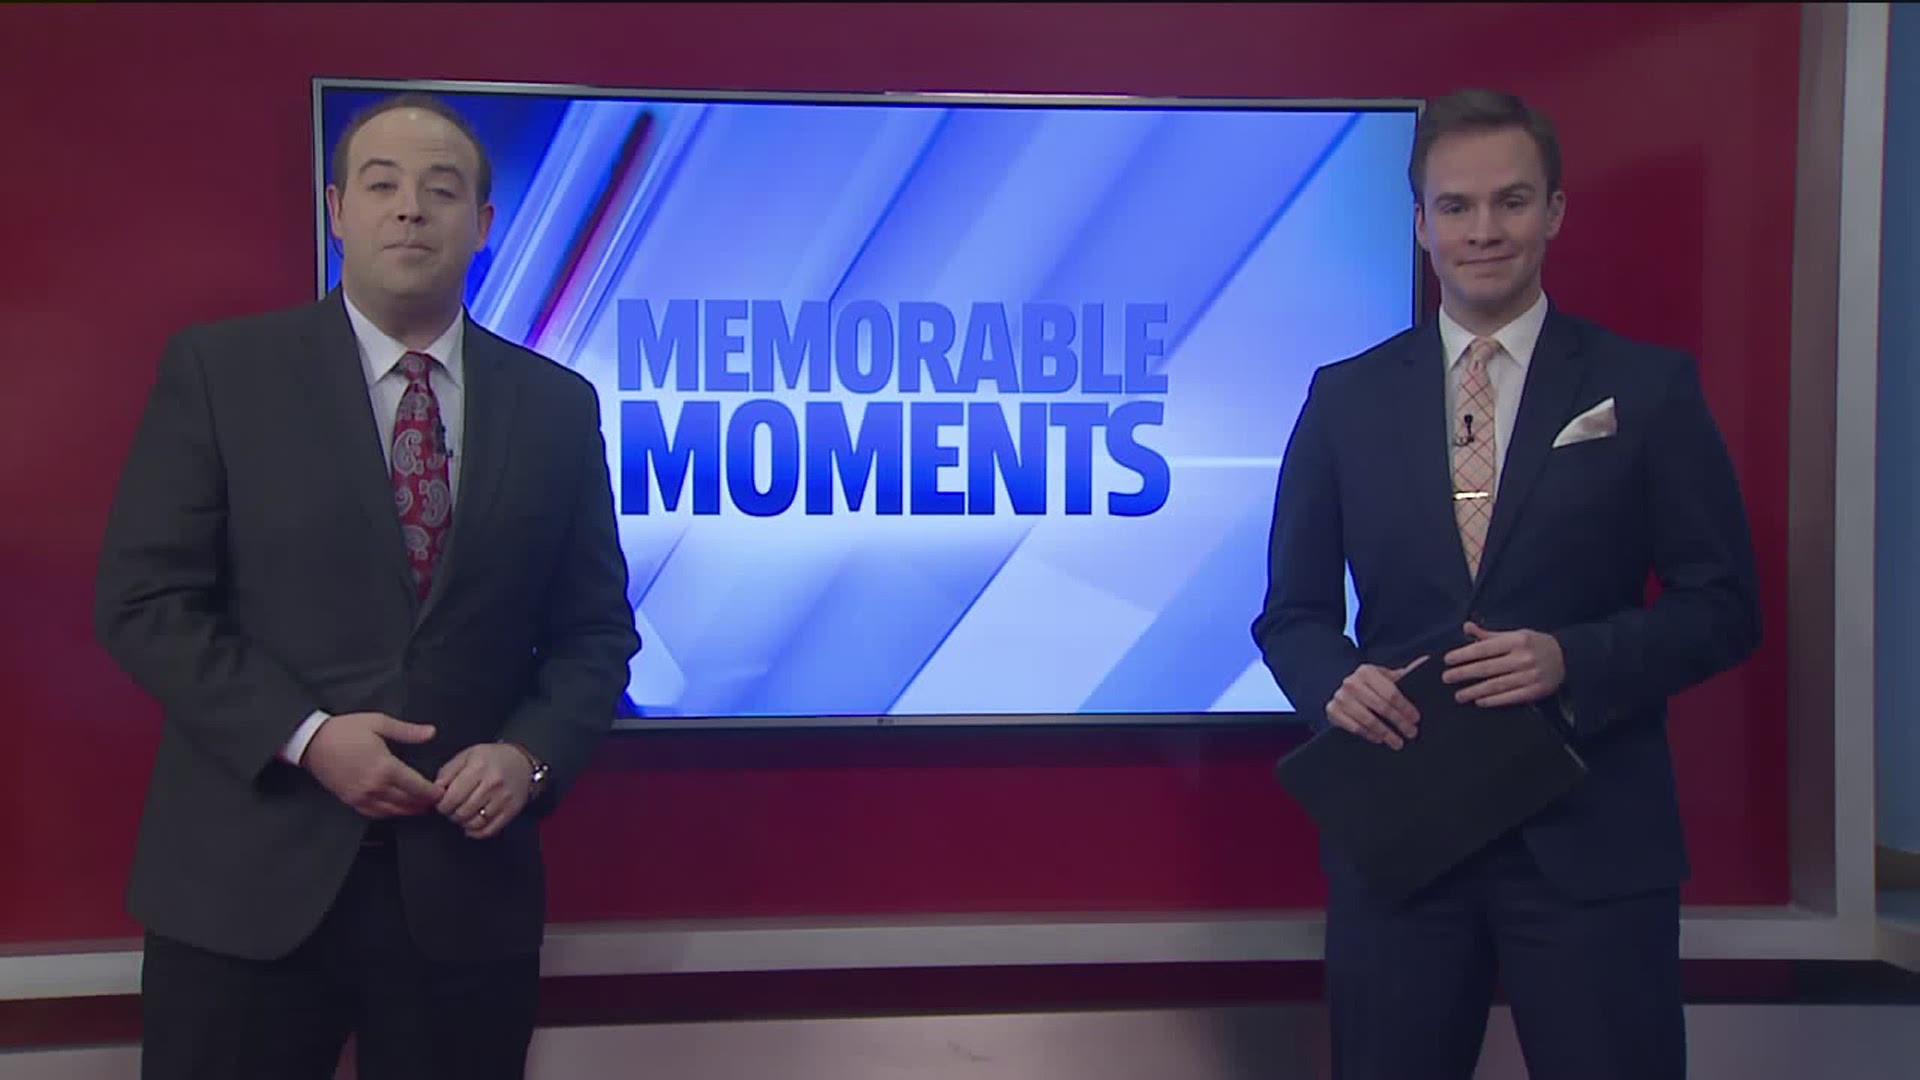 Check out the Memorable Moments from the month of February on FOX43 Morning News.